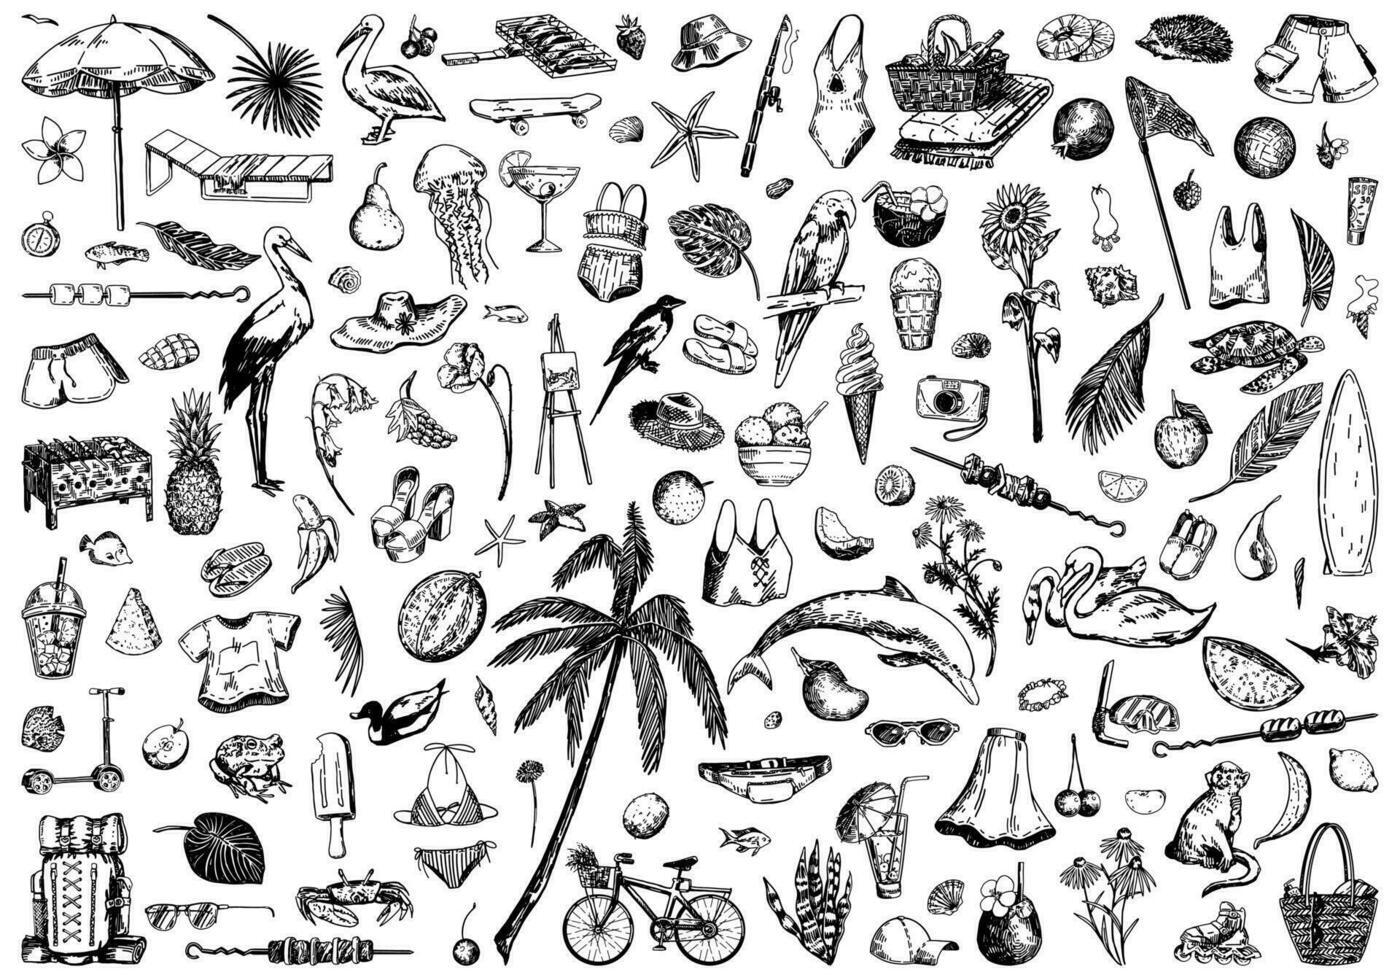 Summer time sketches collection. Drawings set of animals, plants, leisure accessories, clothing, foods. Hand drawn vector illustrations. Cliparts isolated on white.